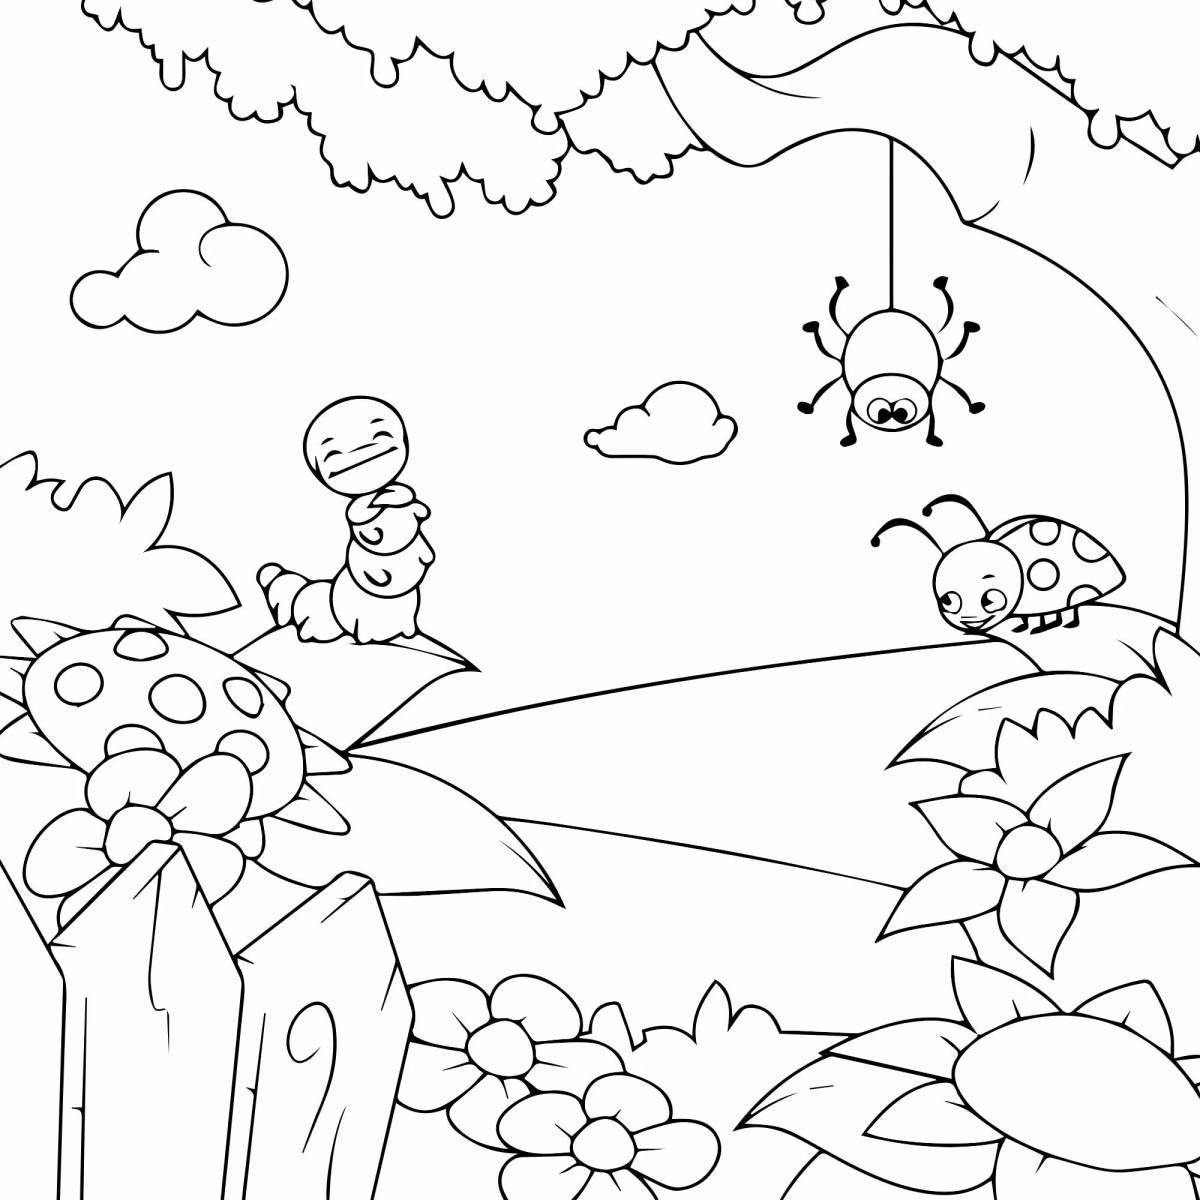 Amazing meadow coloring for kids